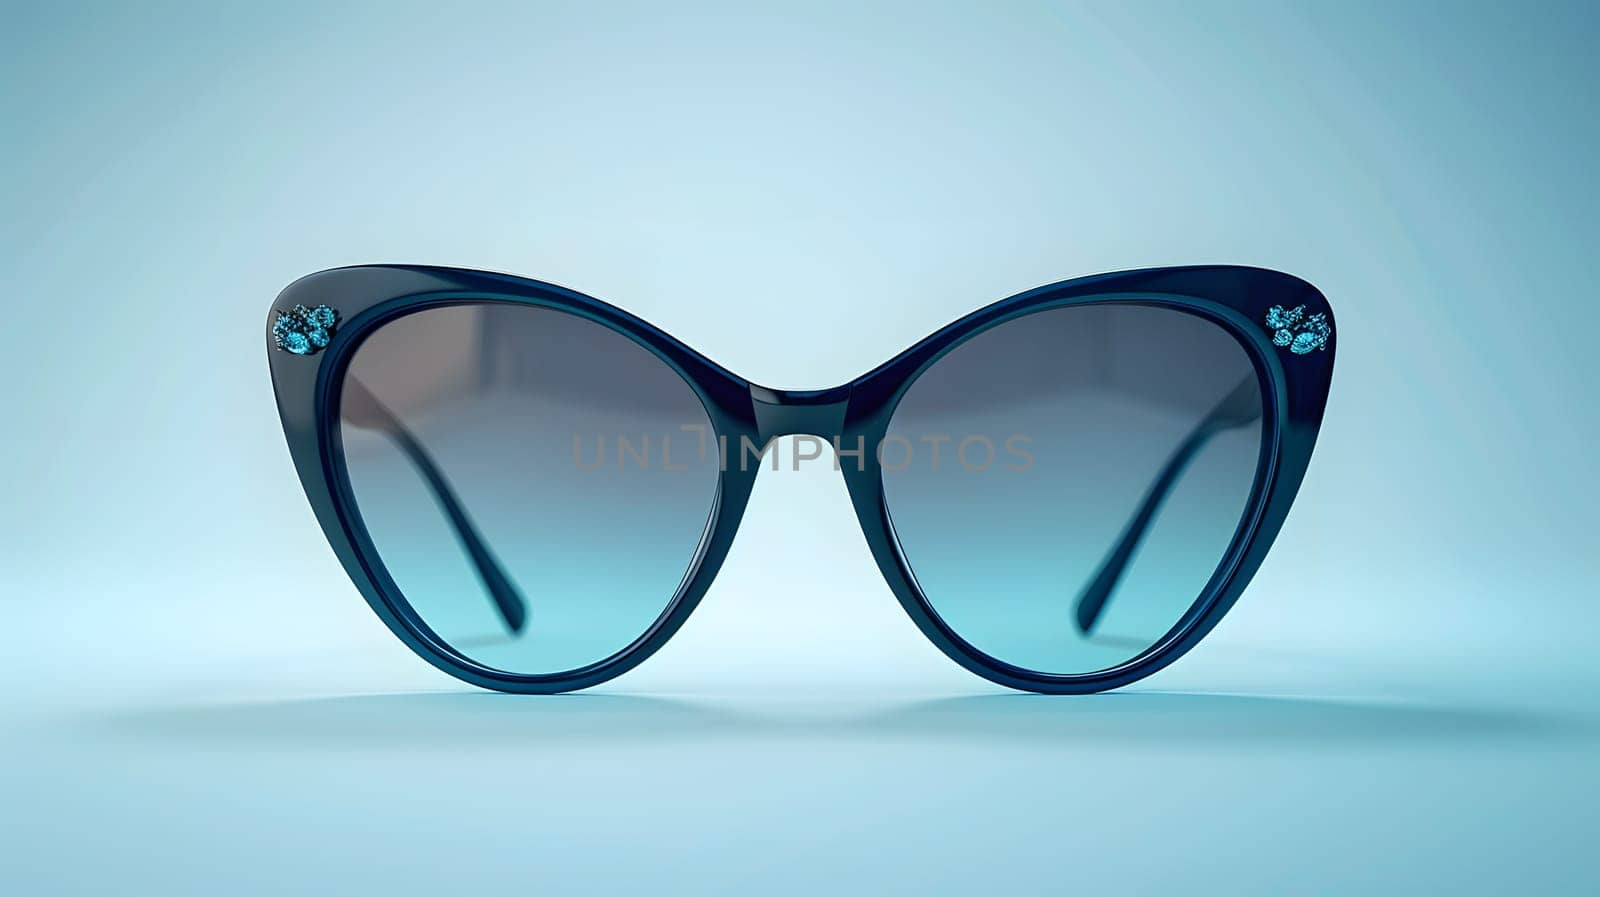 Cat eye glasses on blue surface, eye glass accessory in azure by Nadtochiy